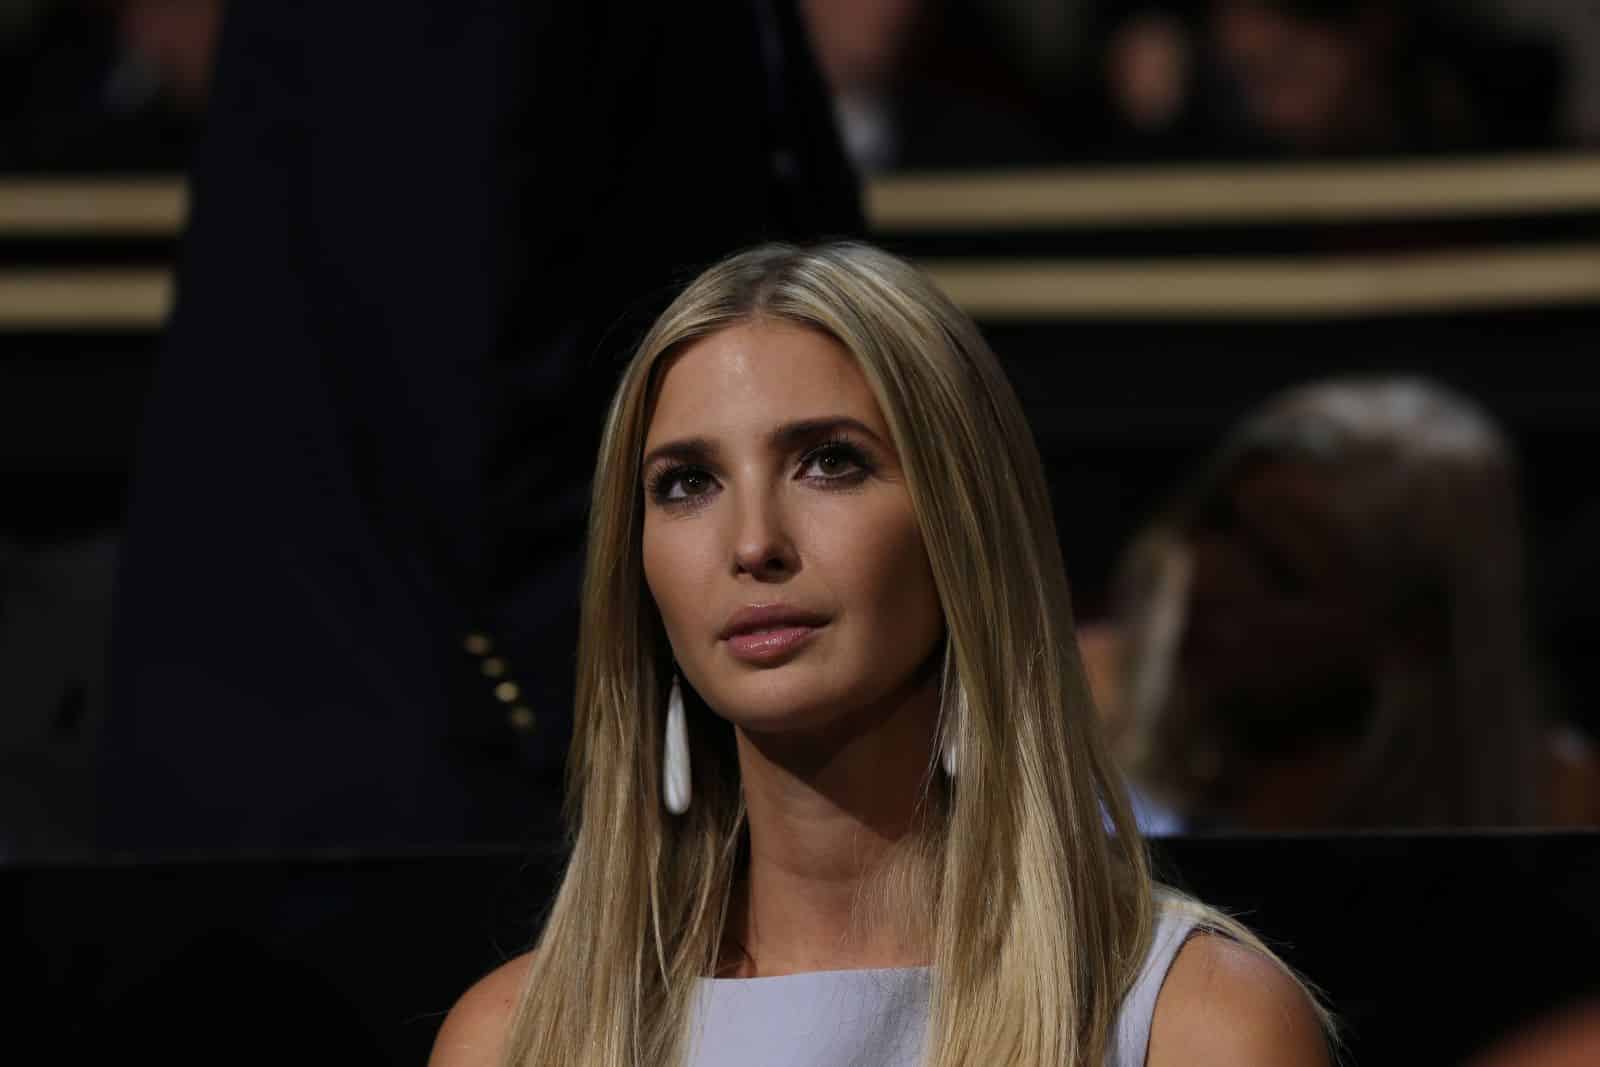 Image Credit: Shutterstock / mark reinstein <p><span>Conservative women like Ivanka Trump have attempted to reframe feminism in terms of economic empowerment and choice, leading to debates over the definition and future direction of feminist advocacy.</span></p>